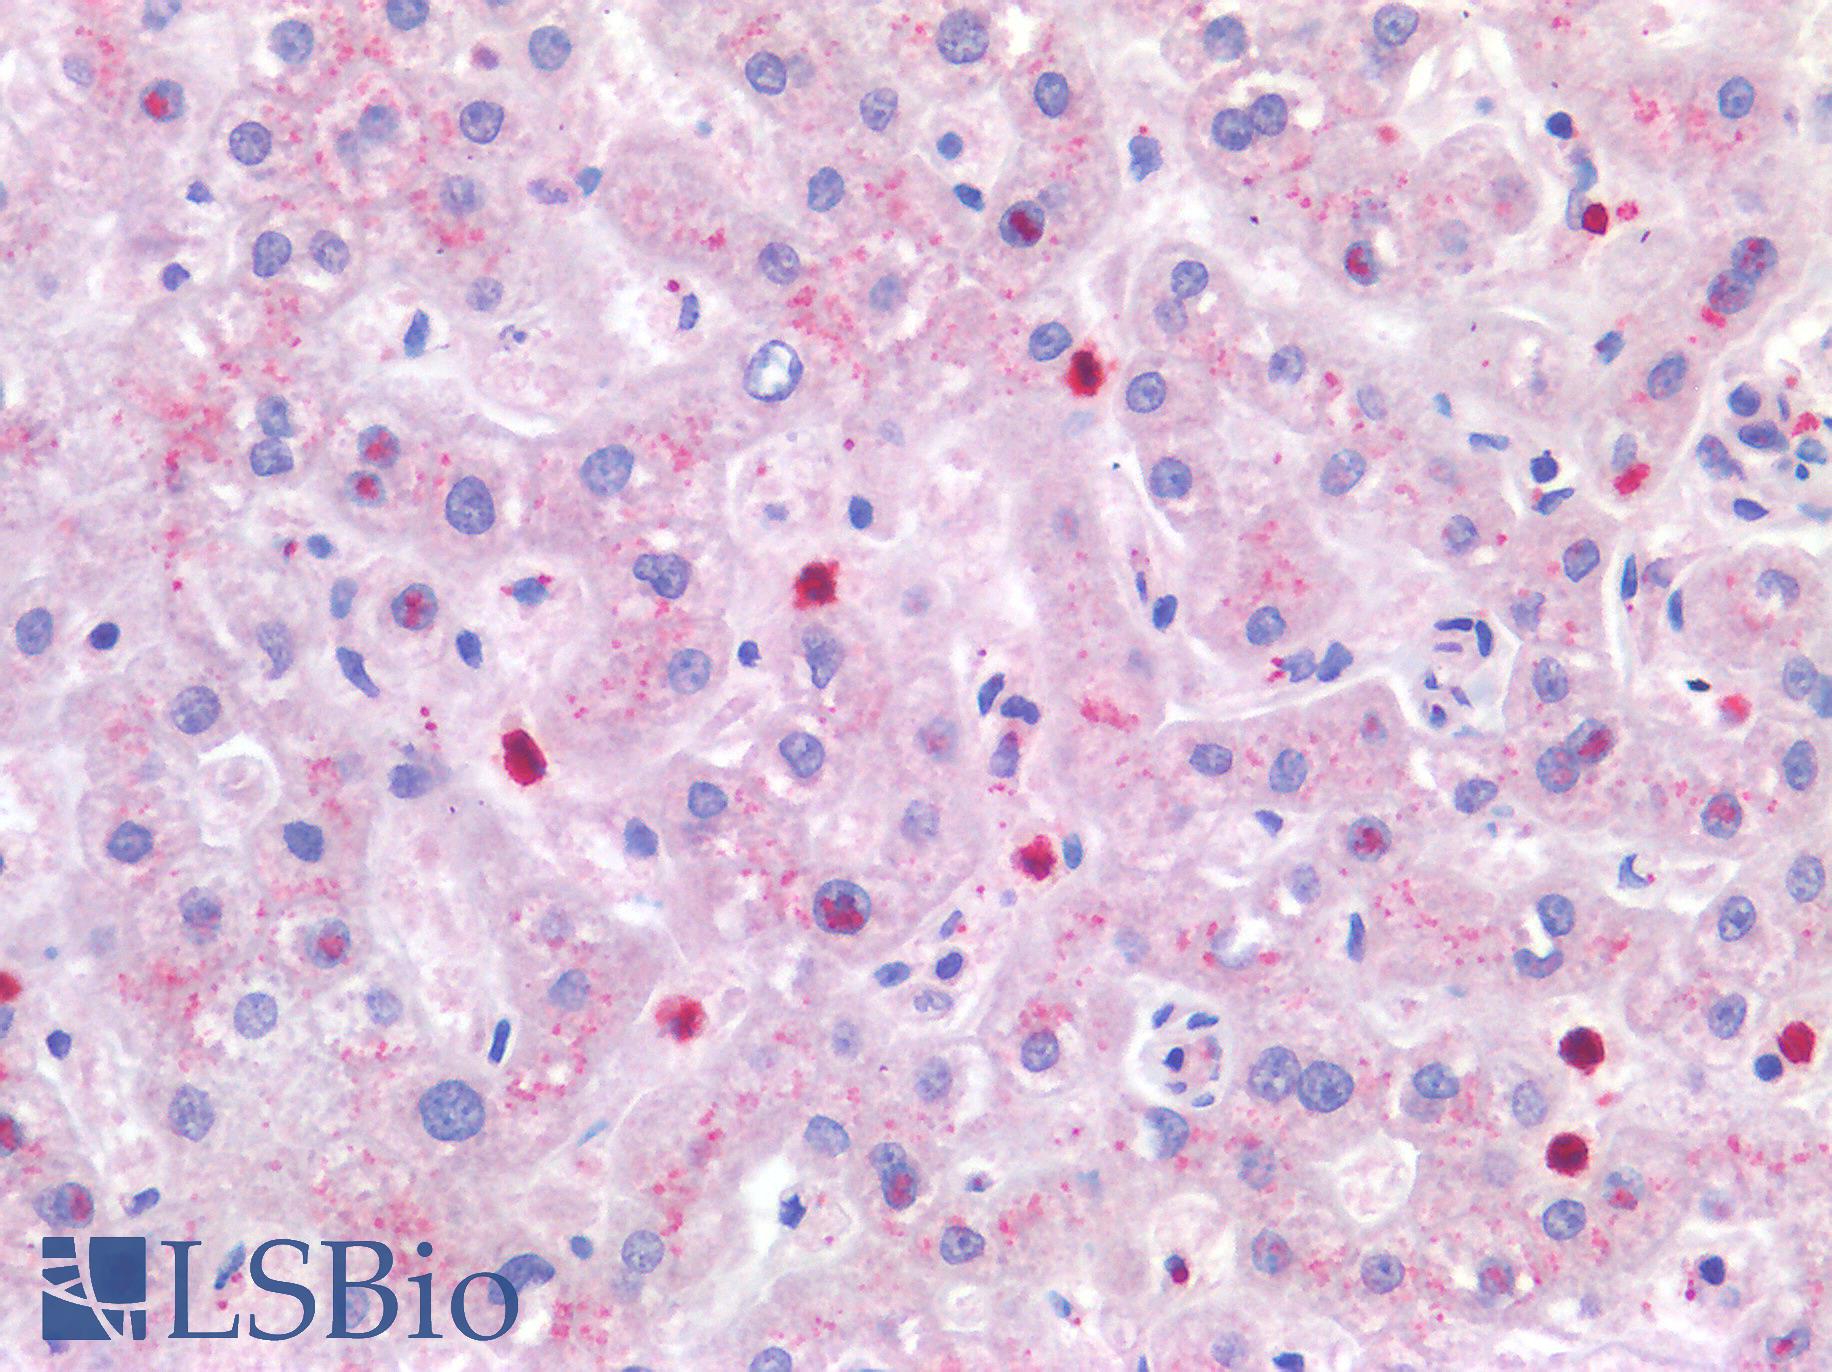 IL4 Antibody - Human Liver: Formalin-Fixed, Paraffin-Embedded (FFPE)